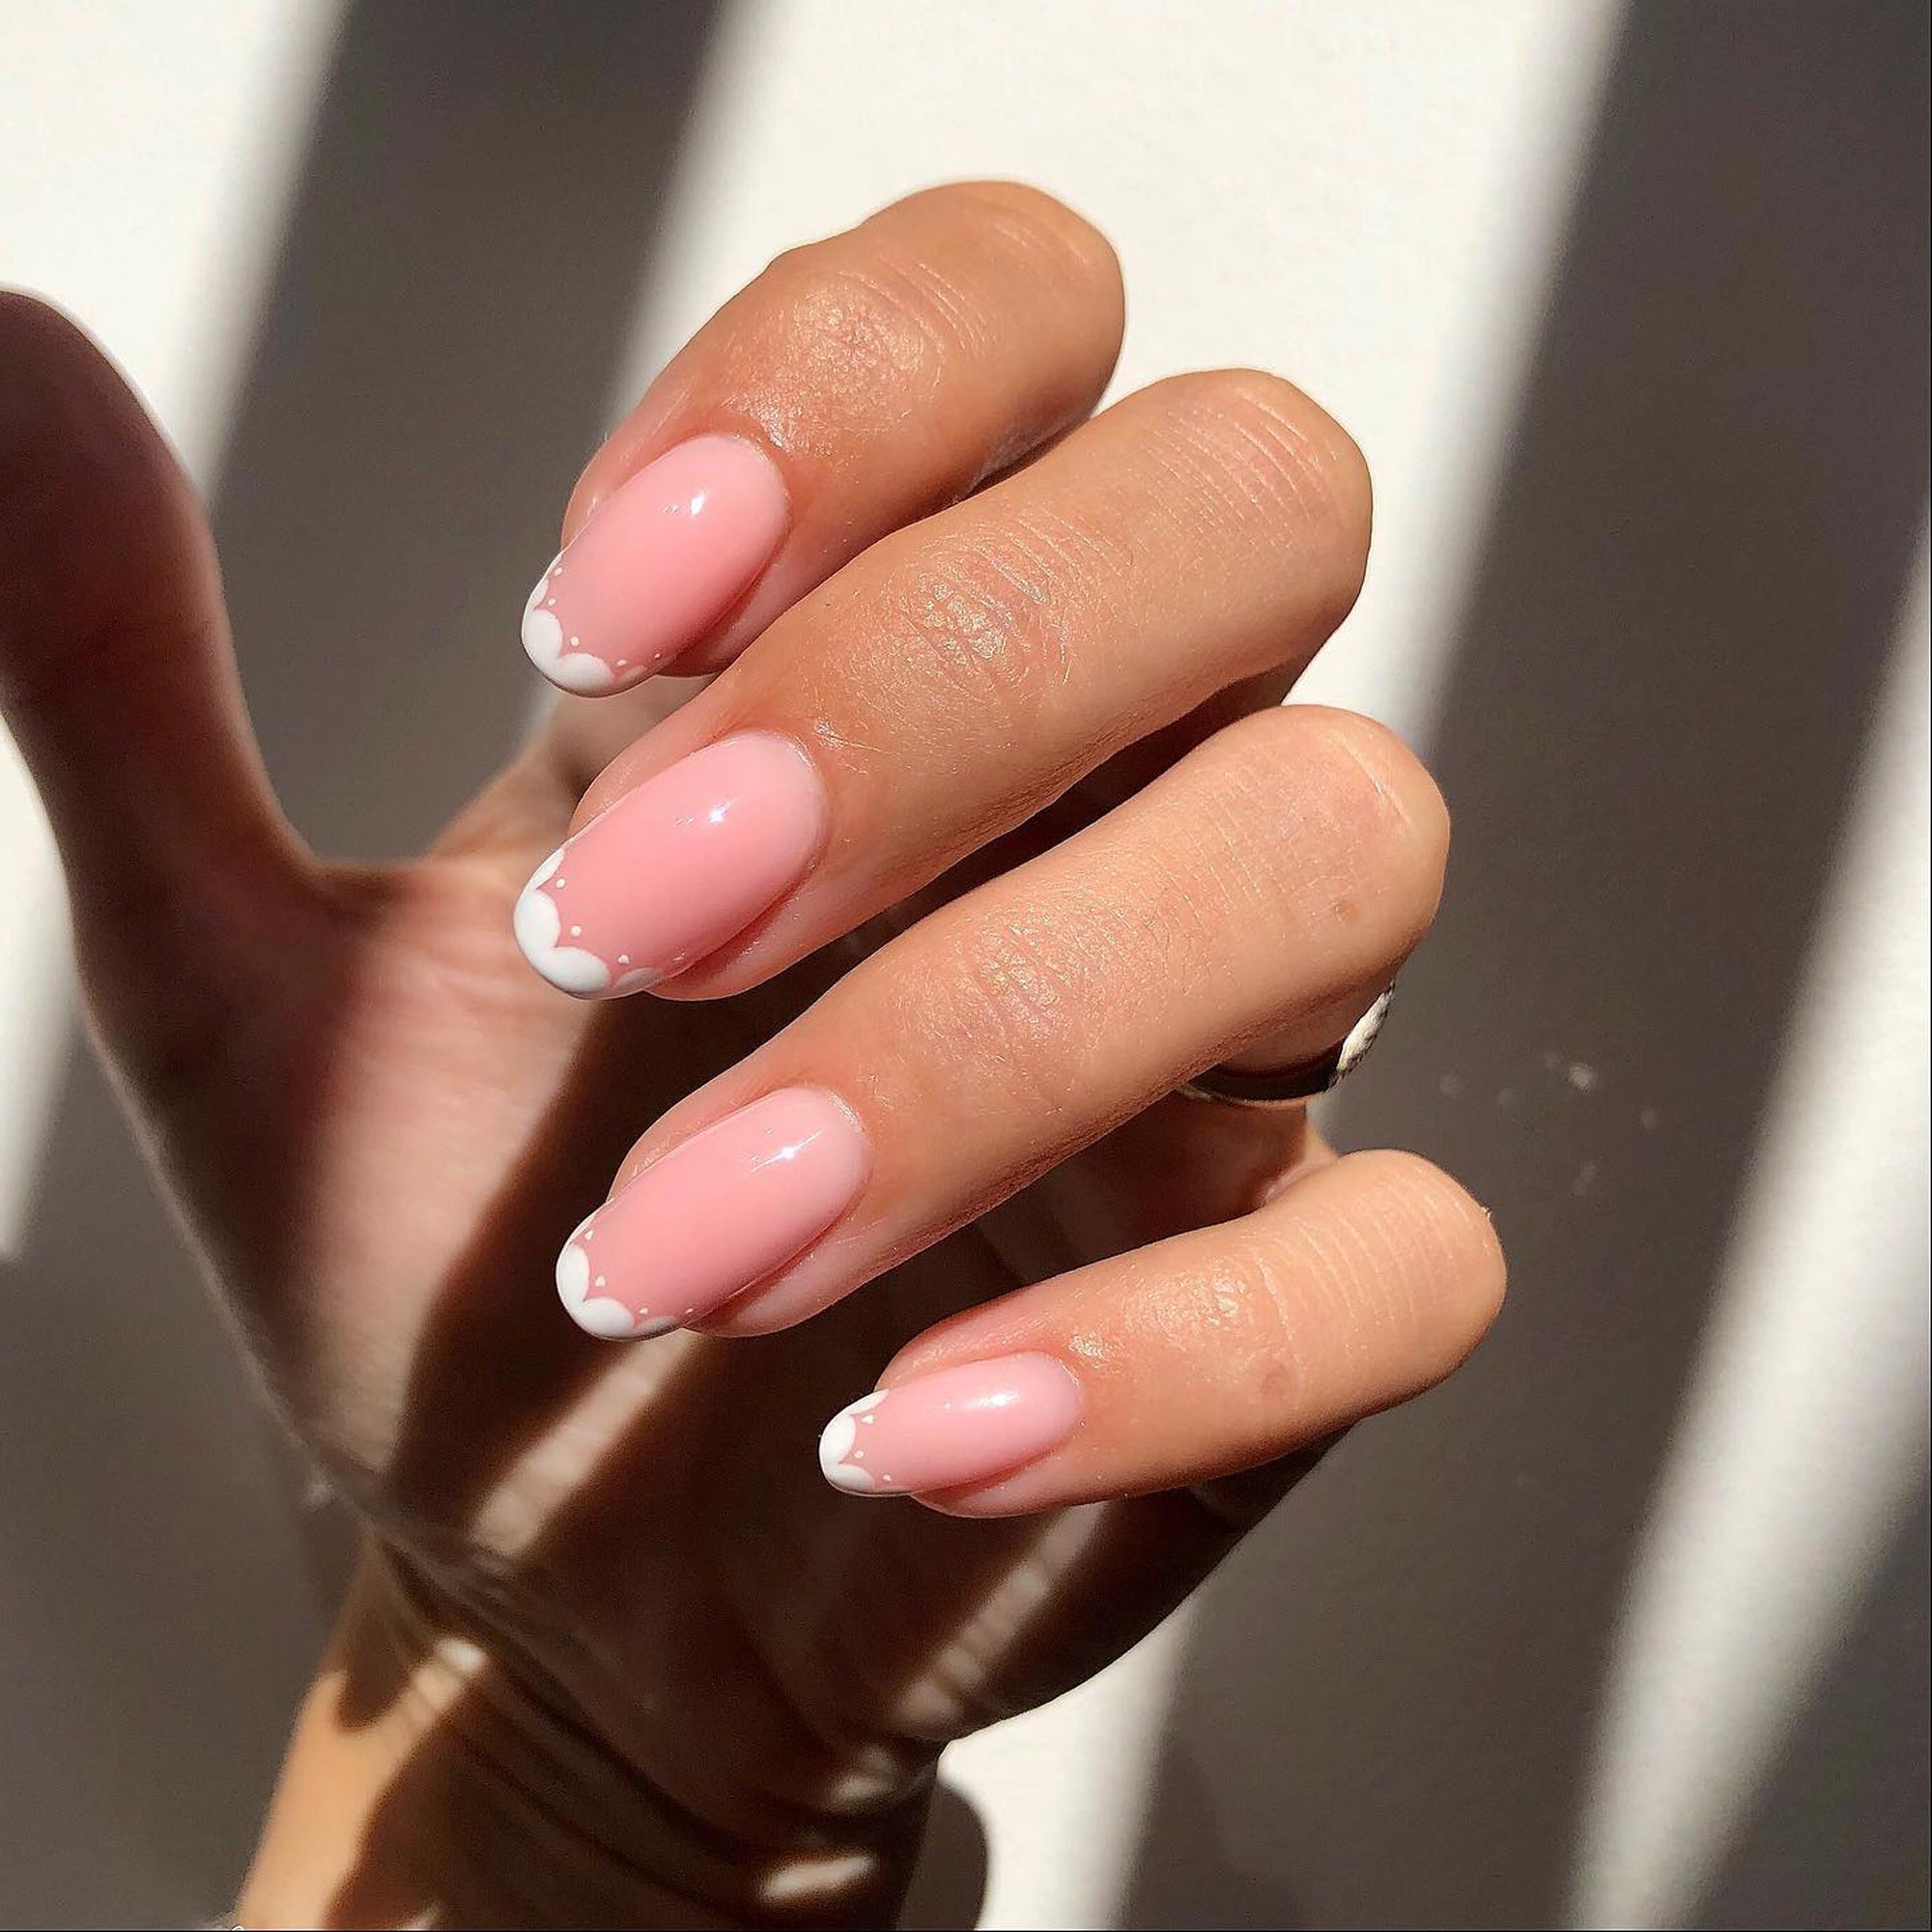 Naked Nails Are The Understated Beauty Trend We Ve Been Waiting For Naked Manicure